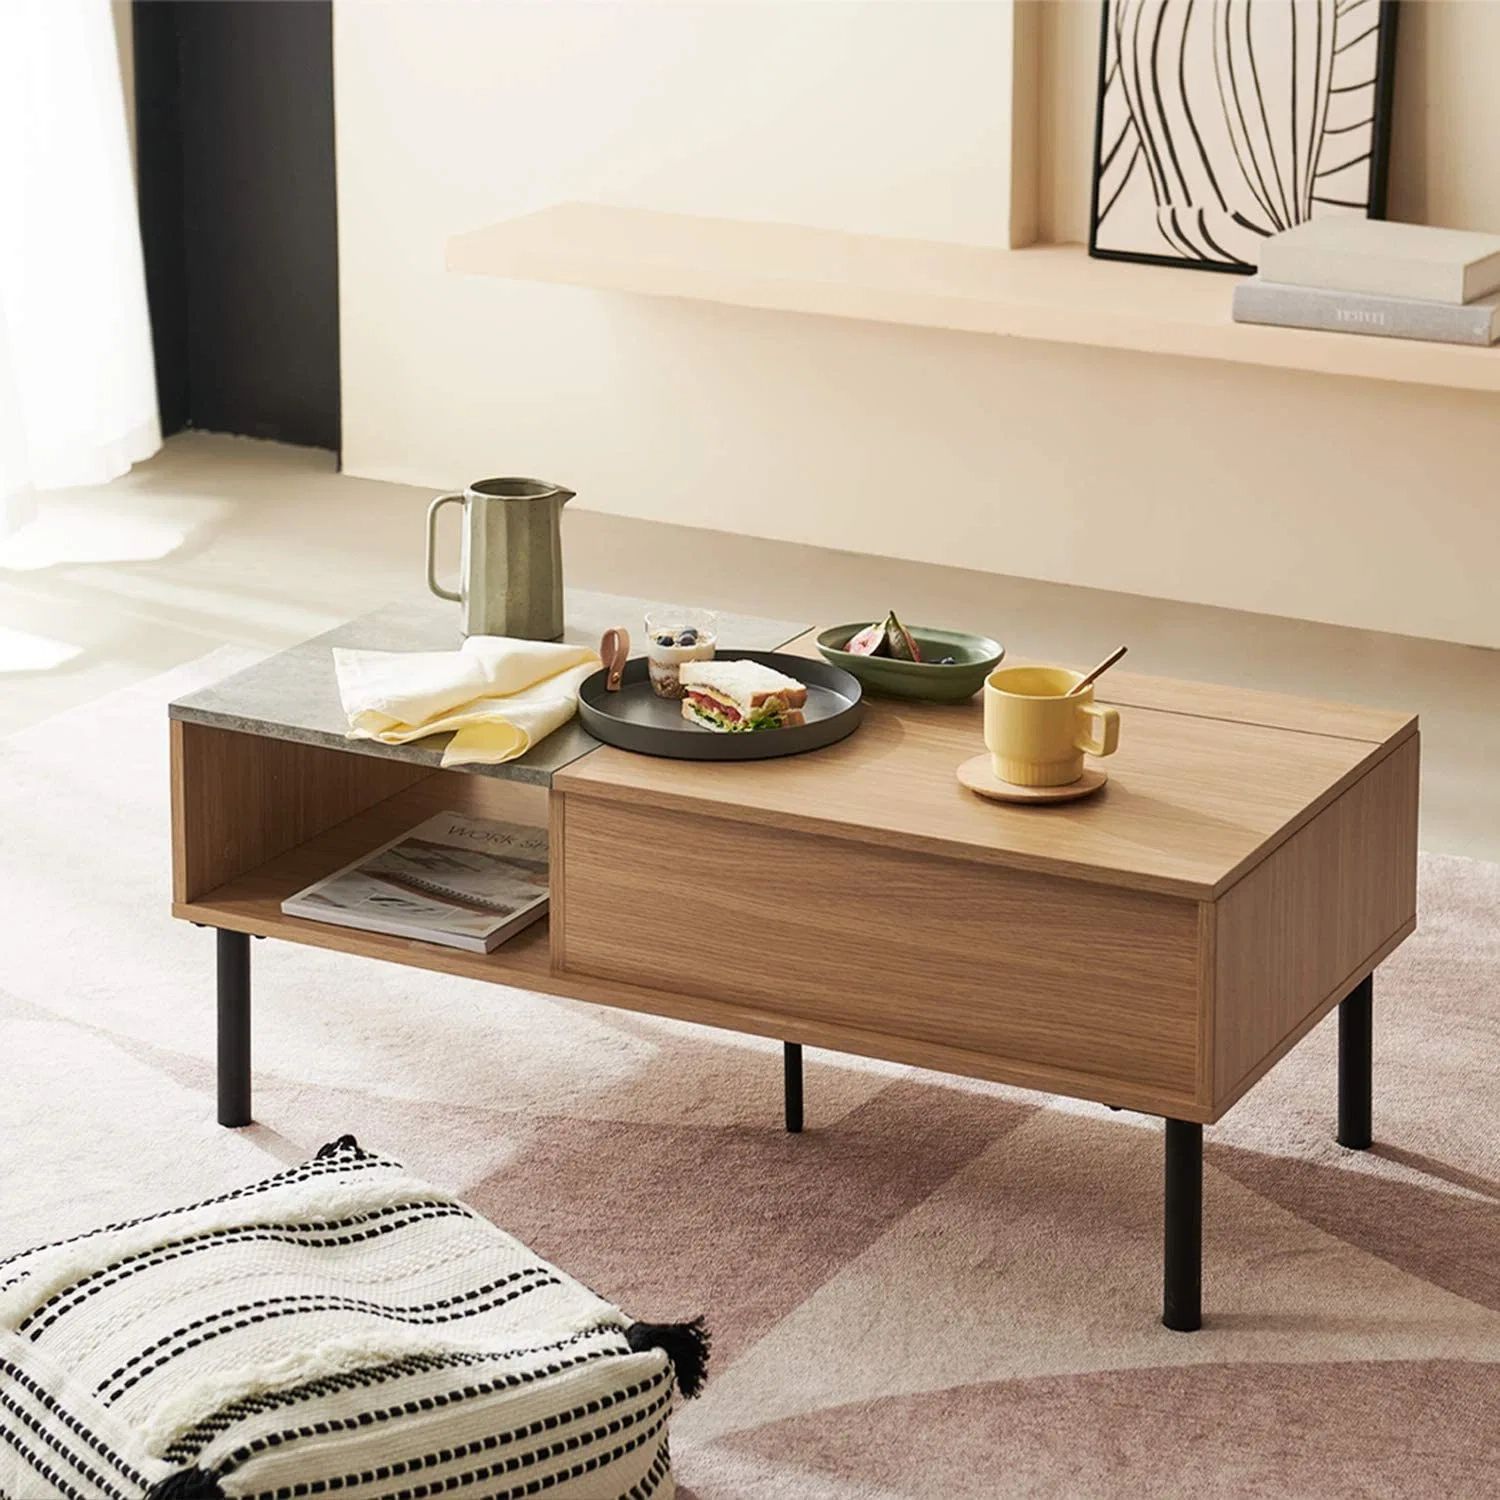 Lift Top Coffee Table With Drawers And Hidden Compartment – China Tea Table  With Chairs, Low Tea Table | Made In China With Regard To Lift Top Coffee Tables With Hidden Storage Compartments (Photo 15 of 15)